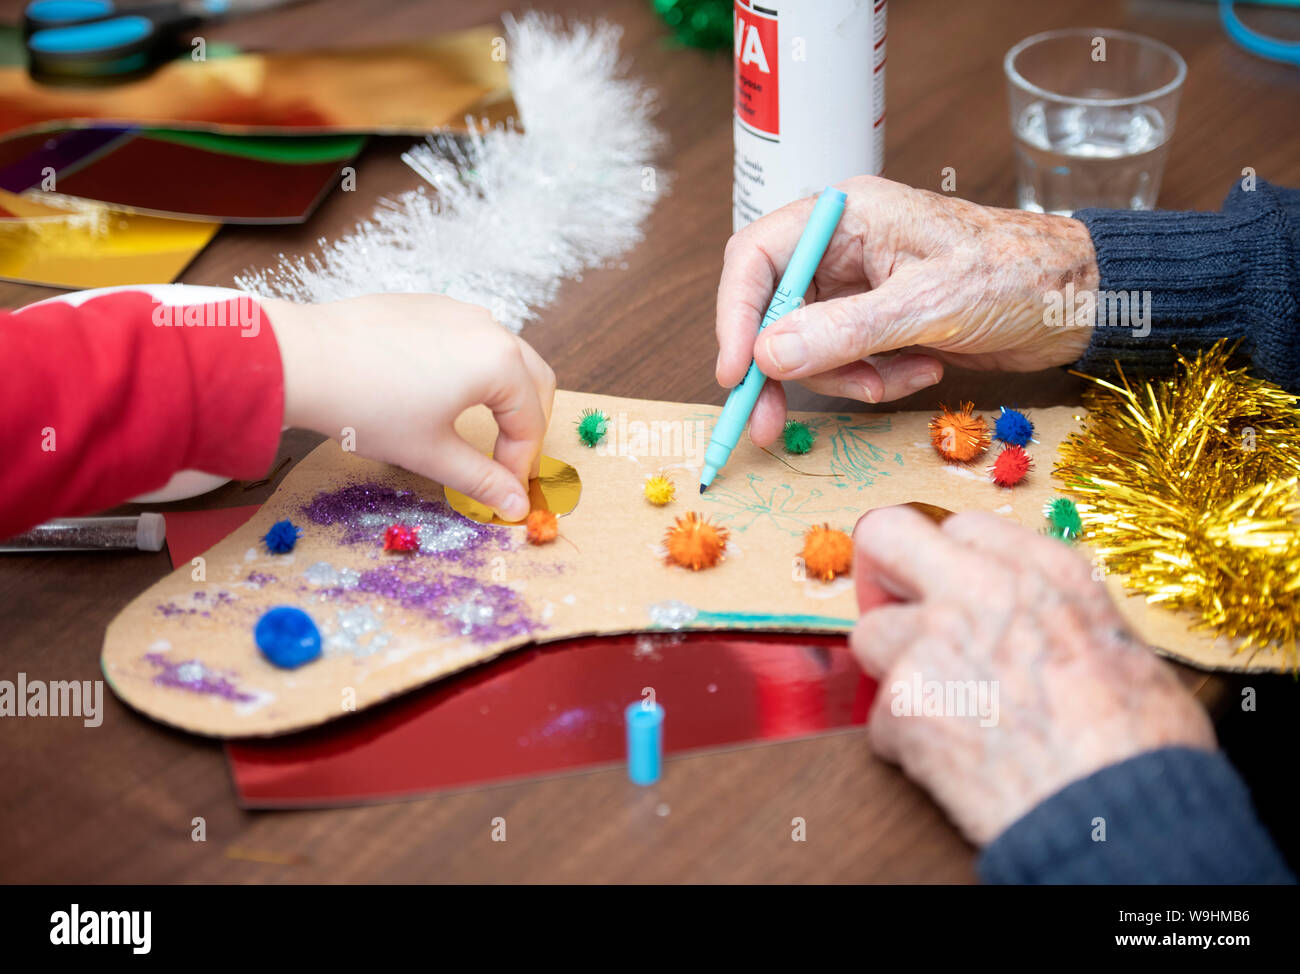 Schoolchildren in the Bristol area visit care homes to make Christmas decorations with residents in a scheme organised by the charity Alive Activies Stock Photo